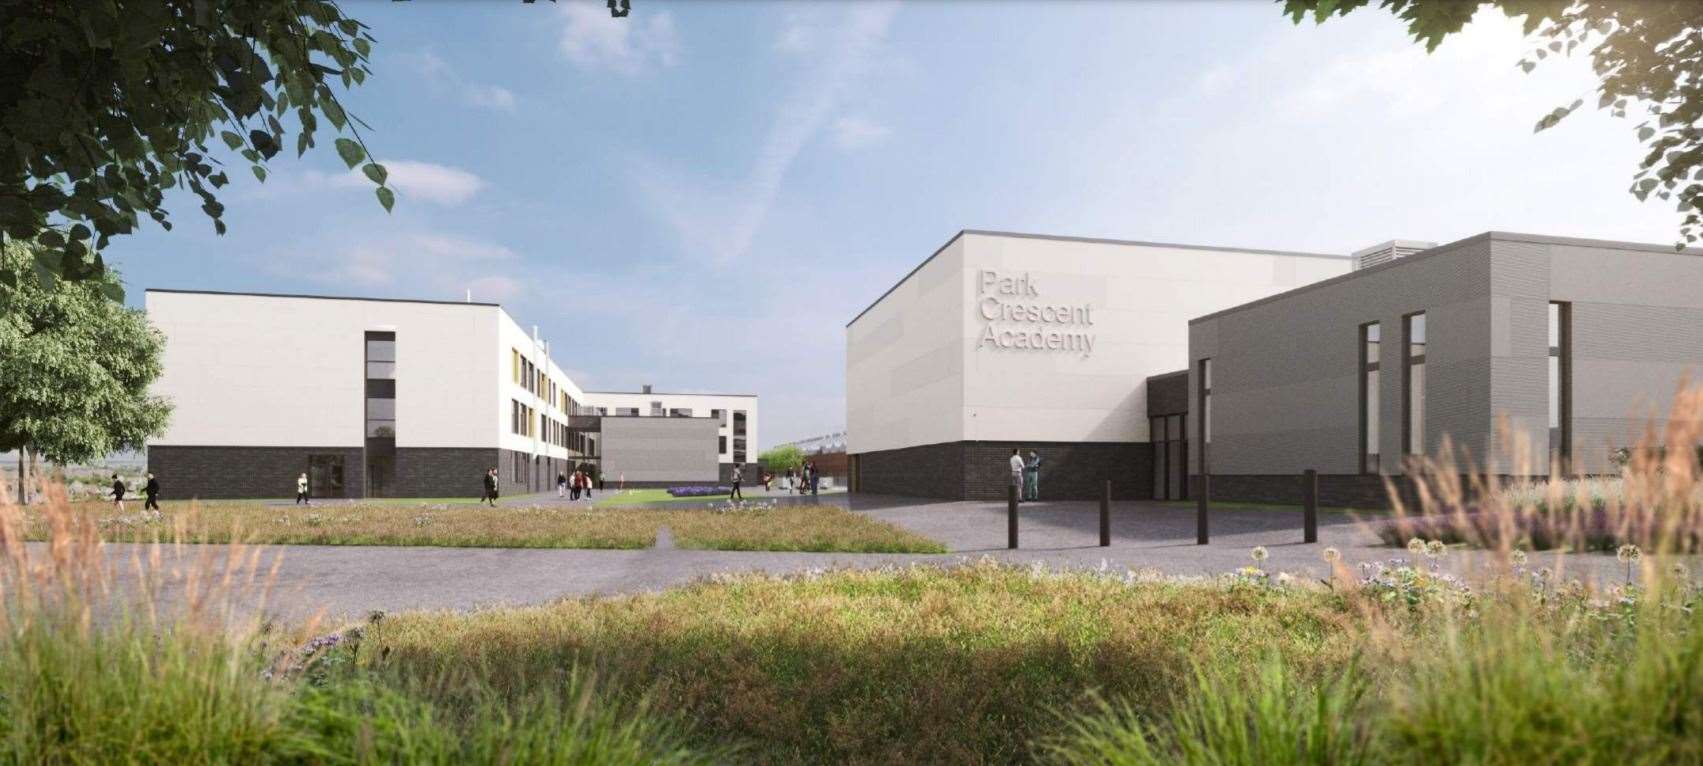 CGI of Park Crescent Academy at former Royal School for Deaf Children site in Margate. Picture: Bond Bryan